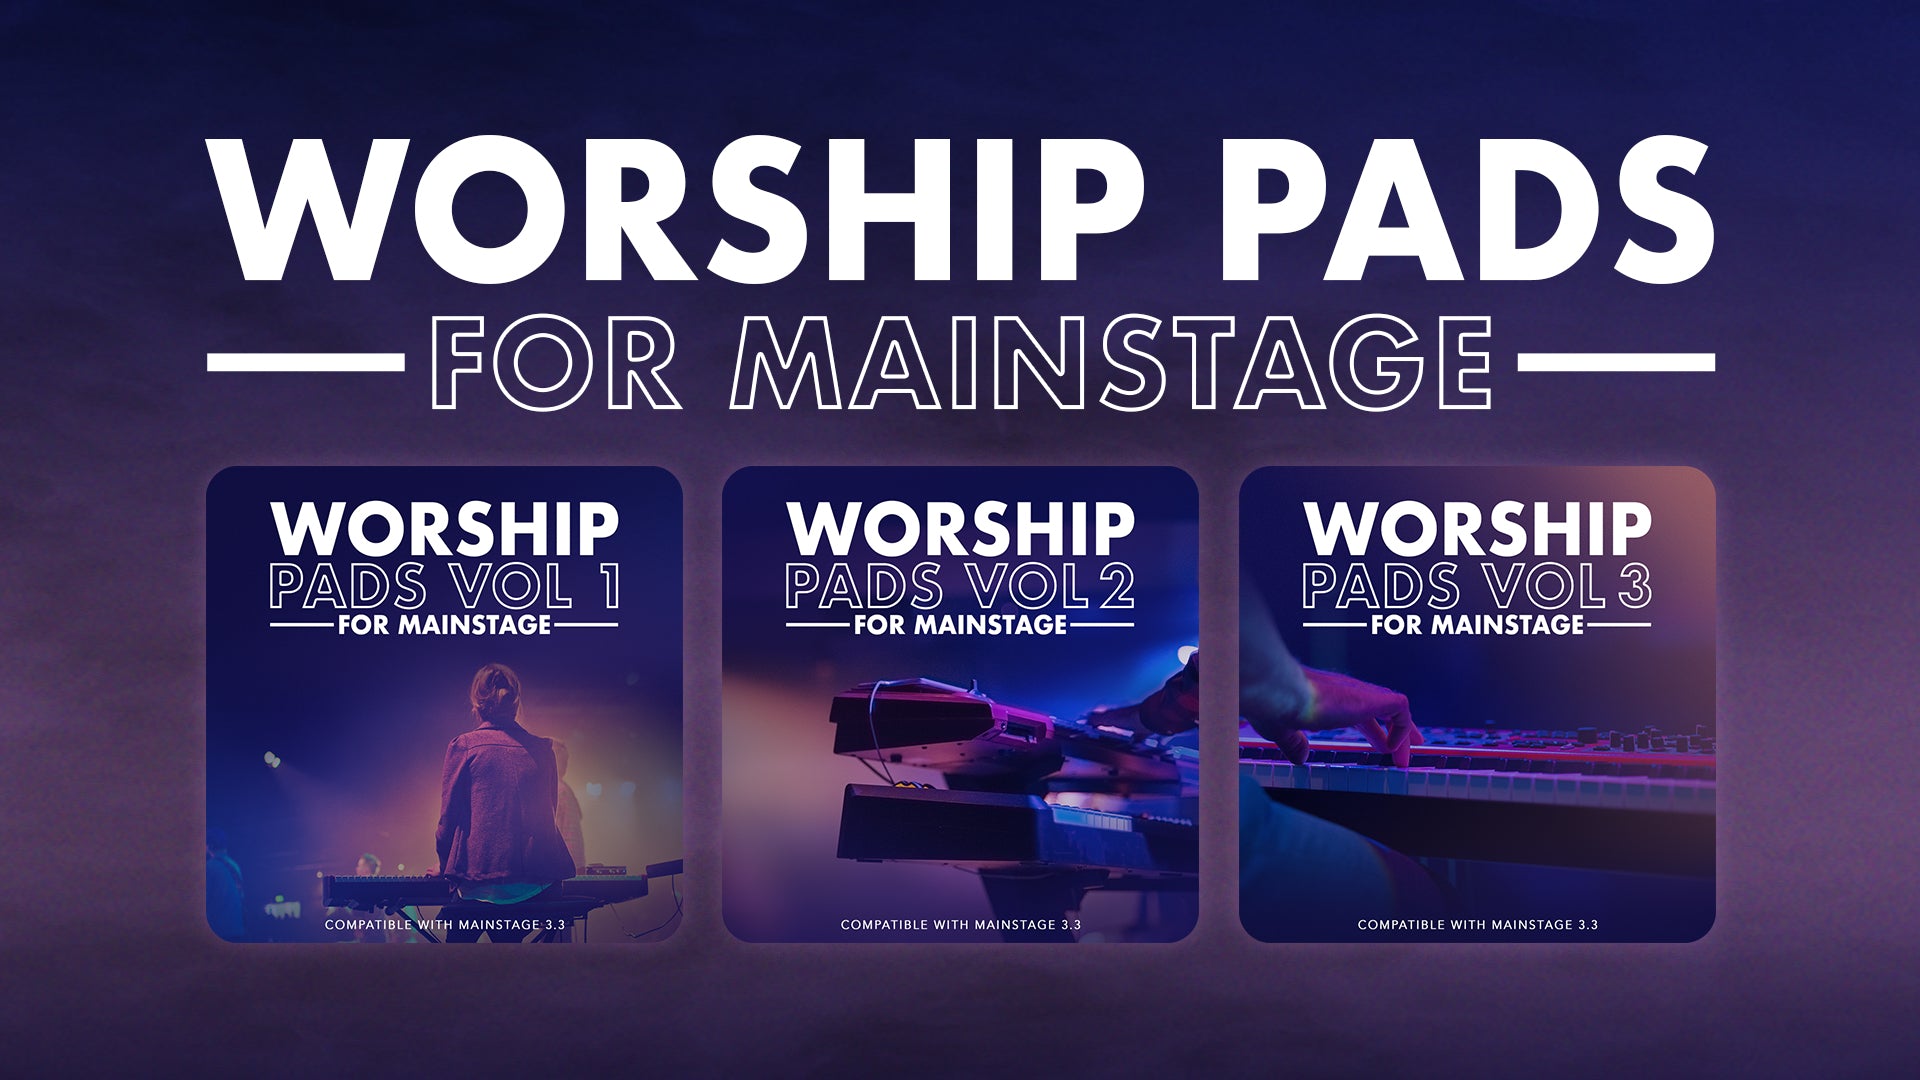 Worship Pads for MainStage Volumes 1-3 are Now Available!